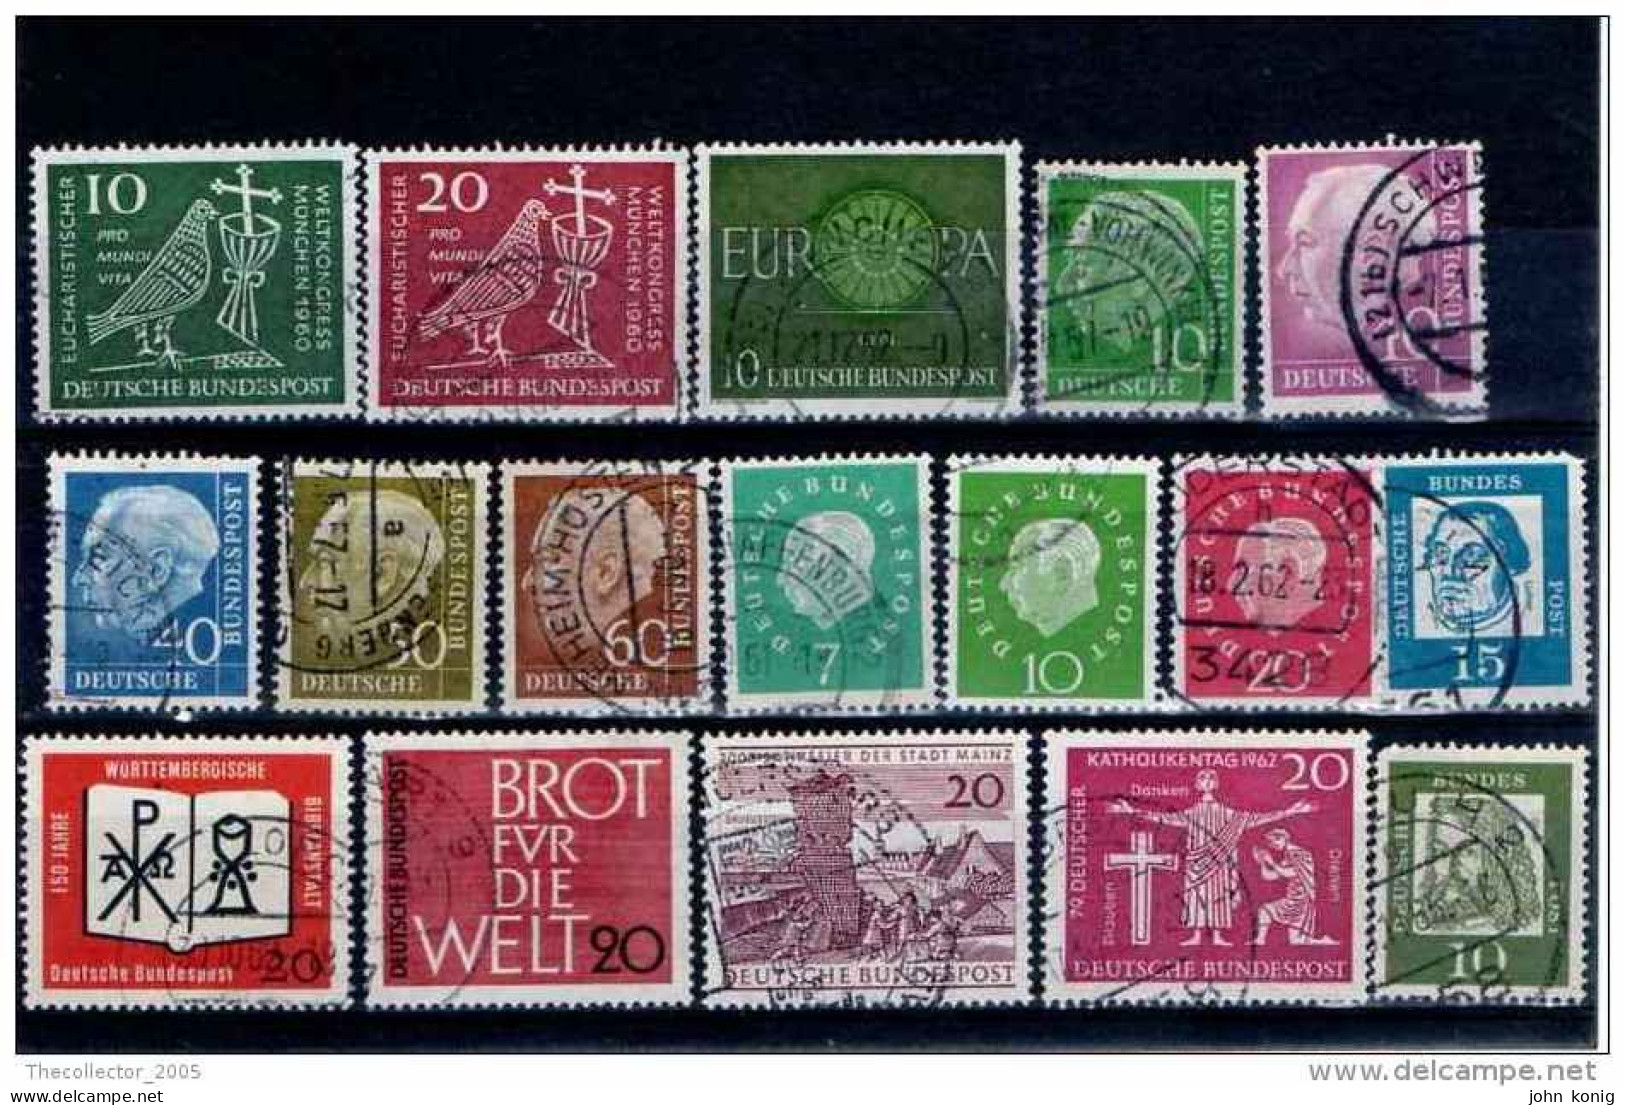 LOTTO FRANCOBOLLI USATI USED STAMPS LOT GERMANIA FEDERALE GERMANY FED. BUNDESPOST ('50s-'60s) - 1959-1980